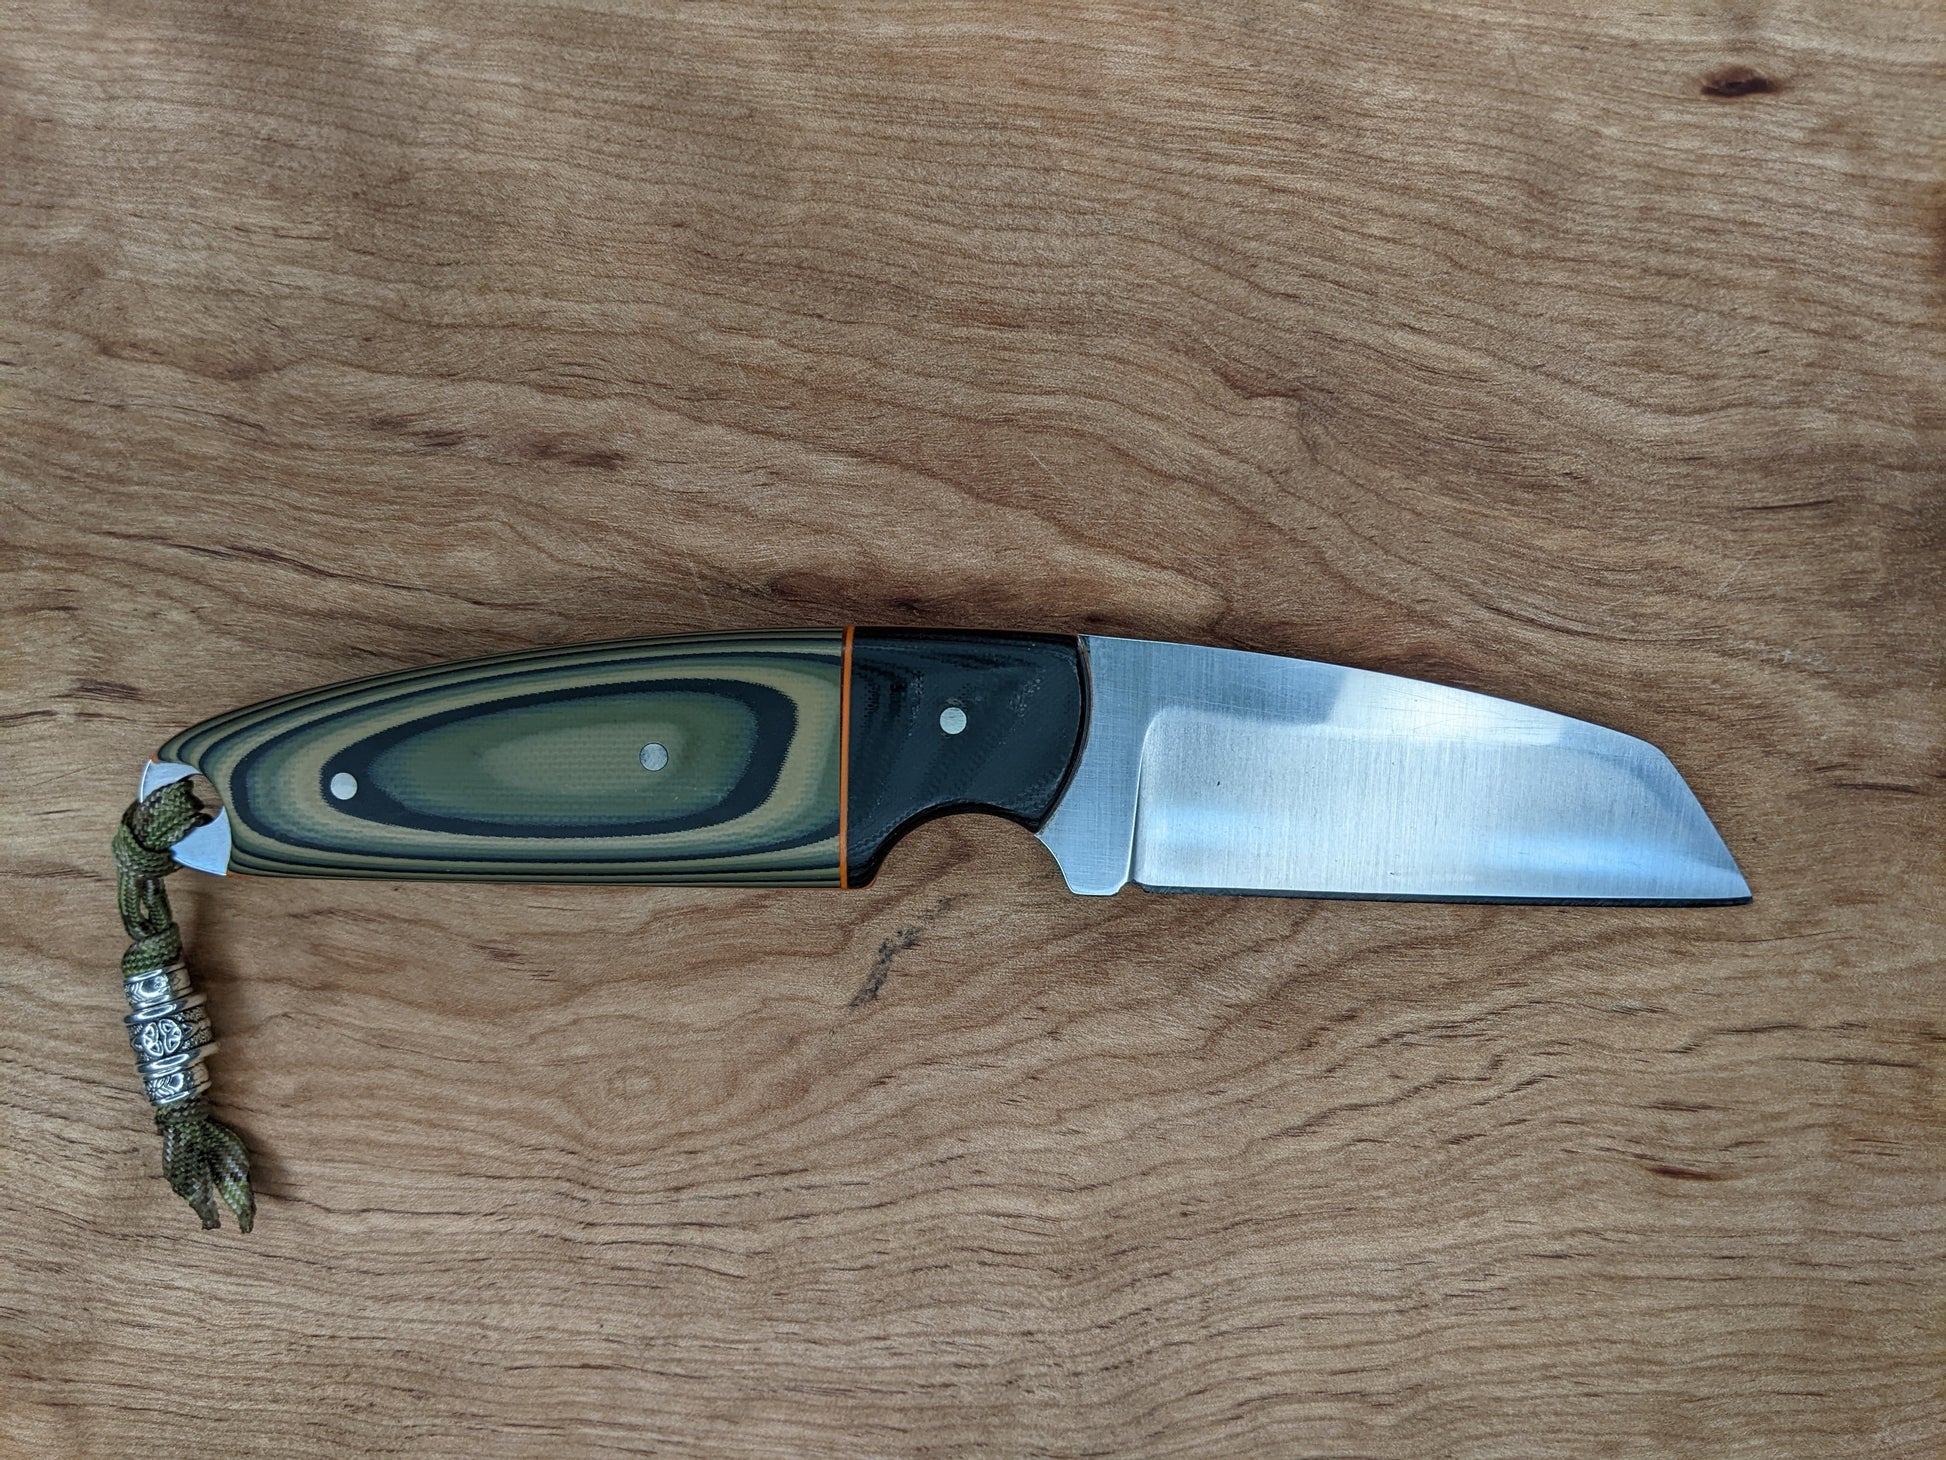 knife with sheepsfoot blade and camouflage handle on wooden backgrounds